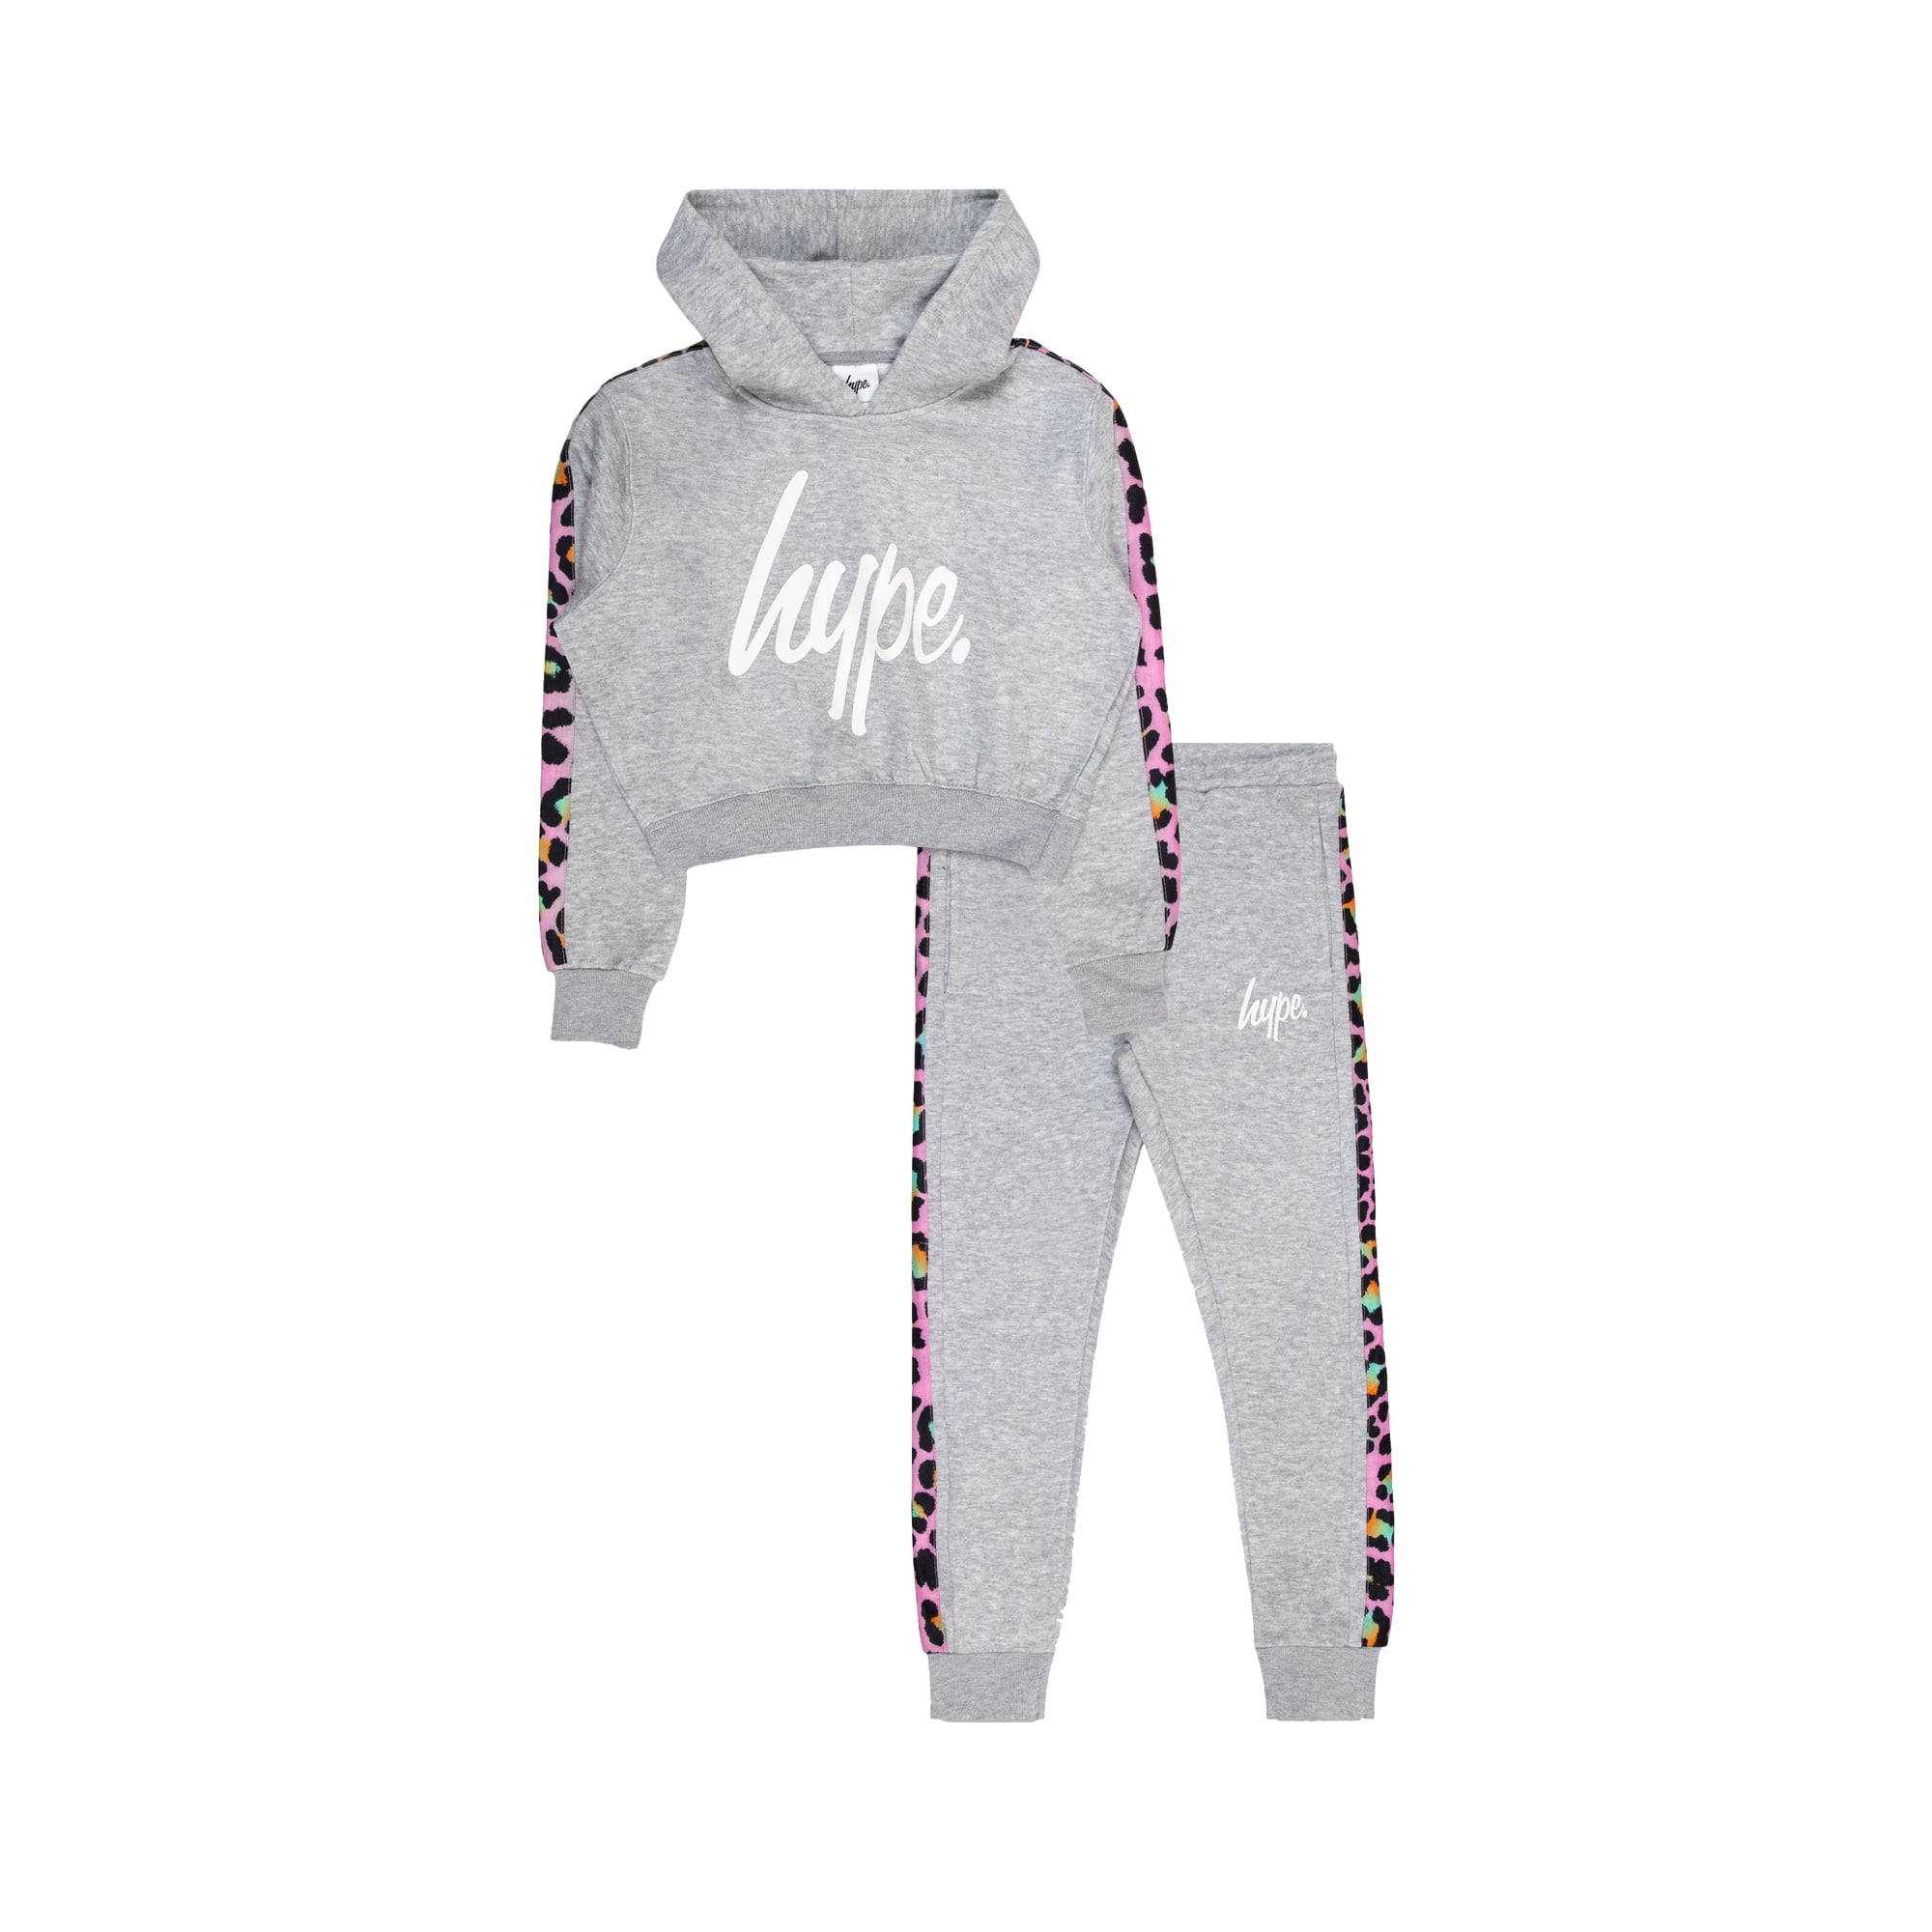 Hype girls hype tracksuit 